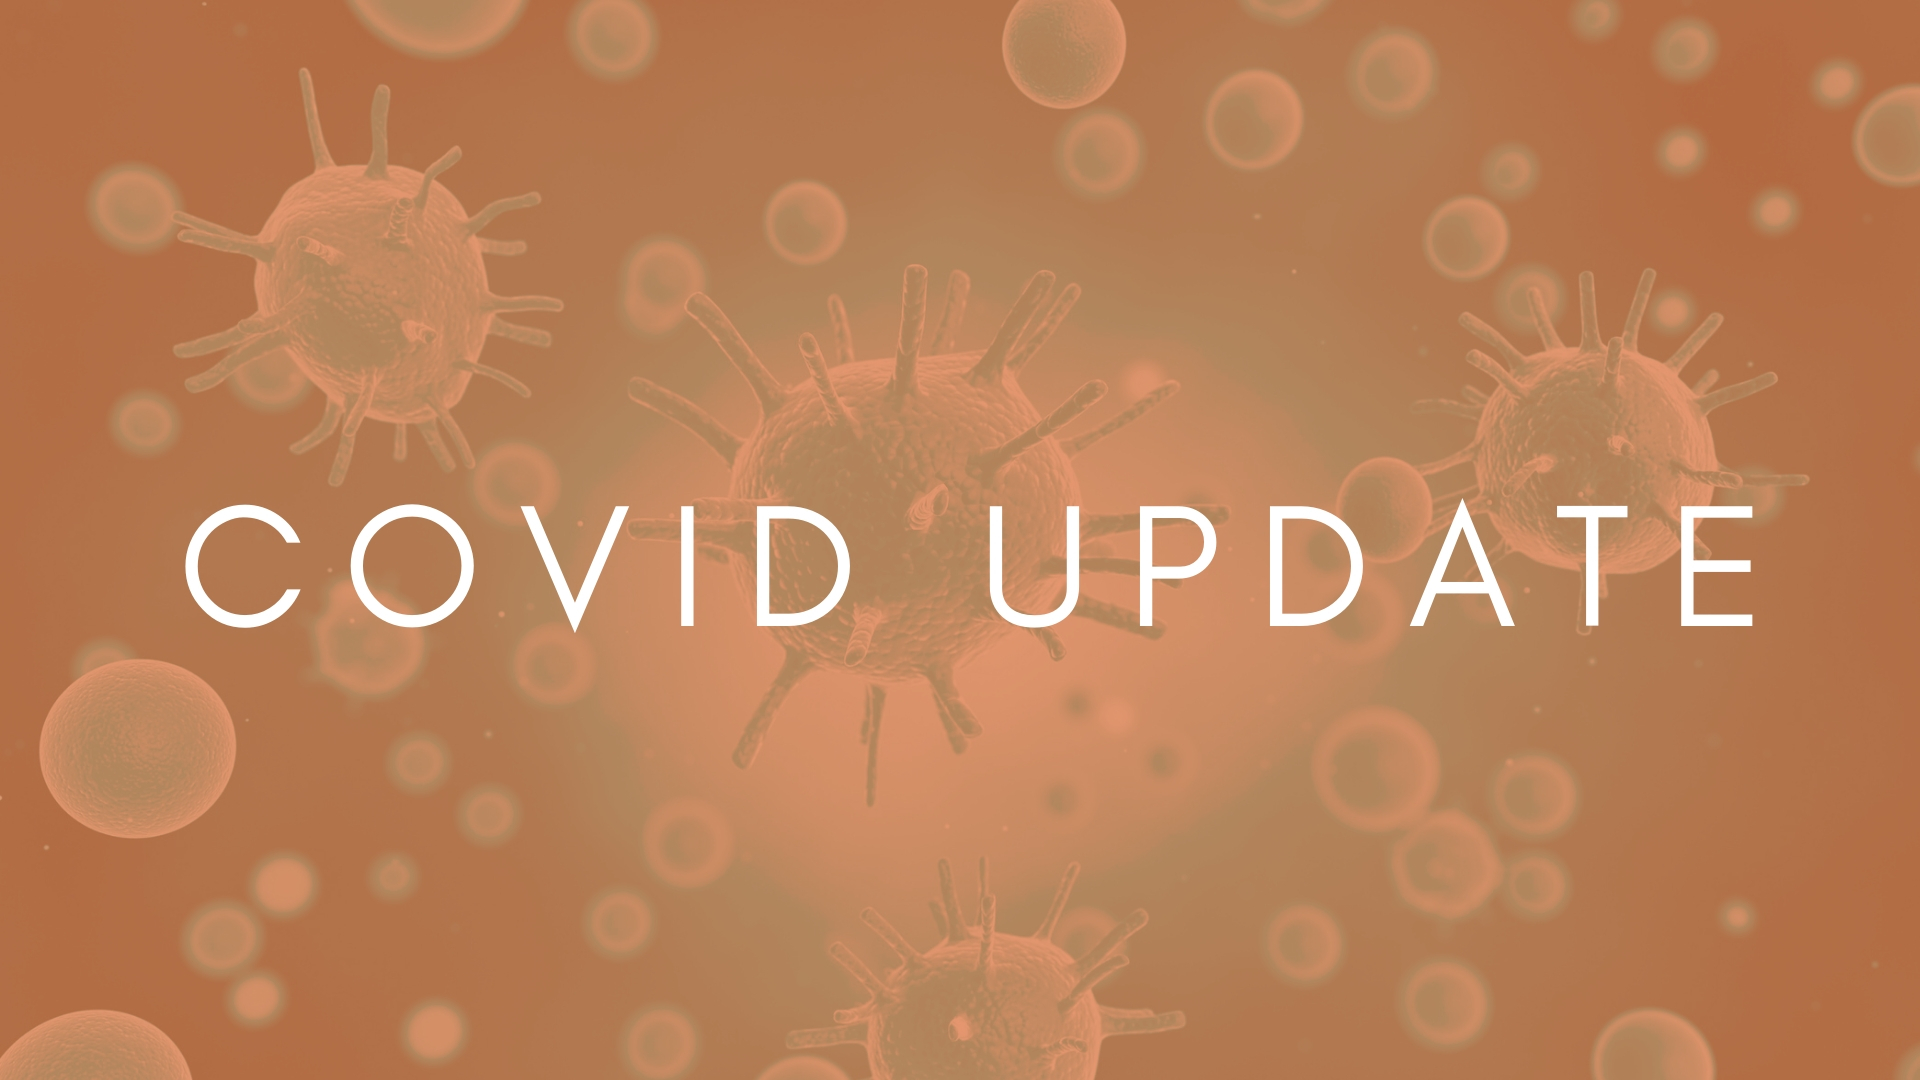 graphic with virus and words that state COVID UPDATE